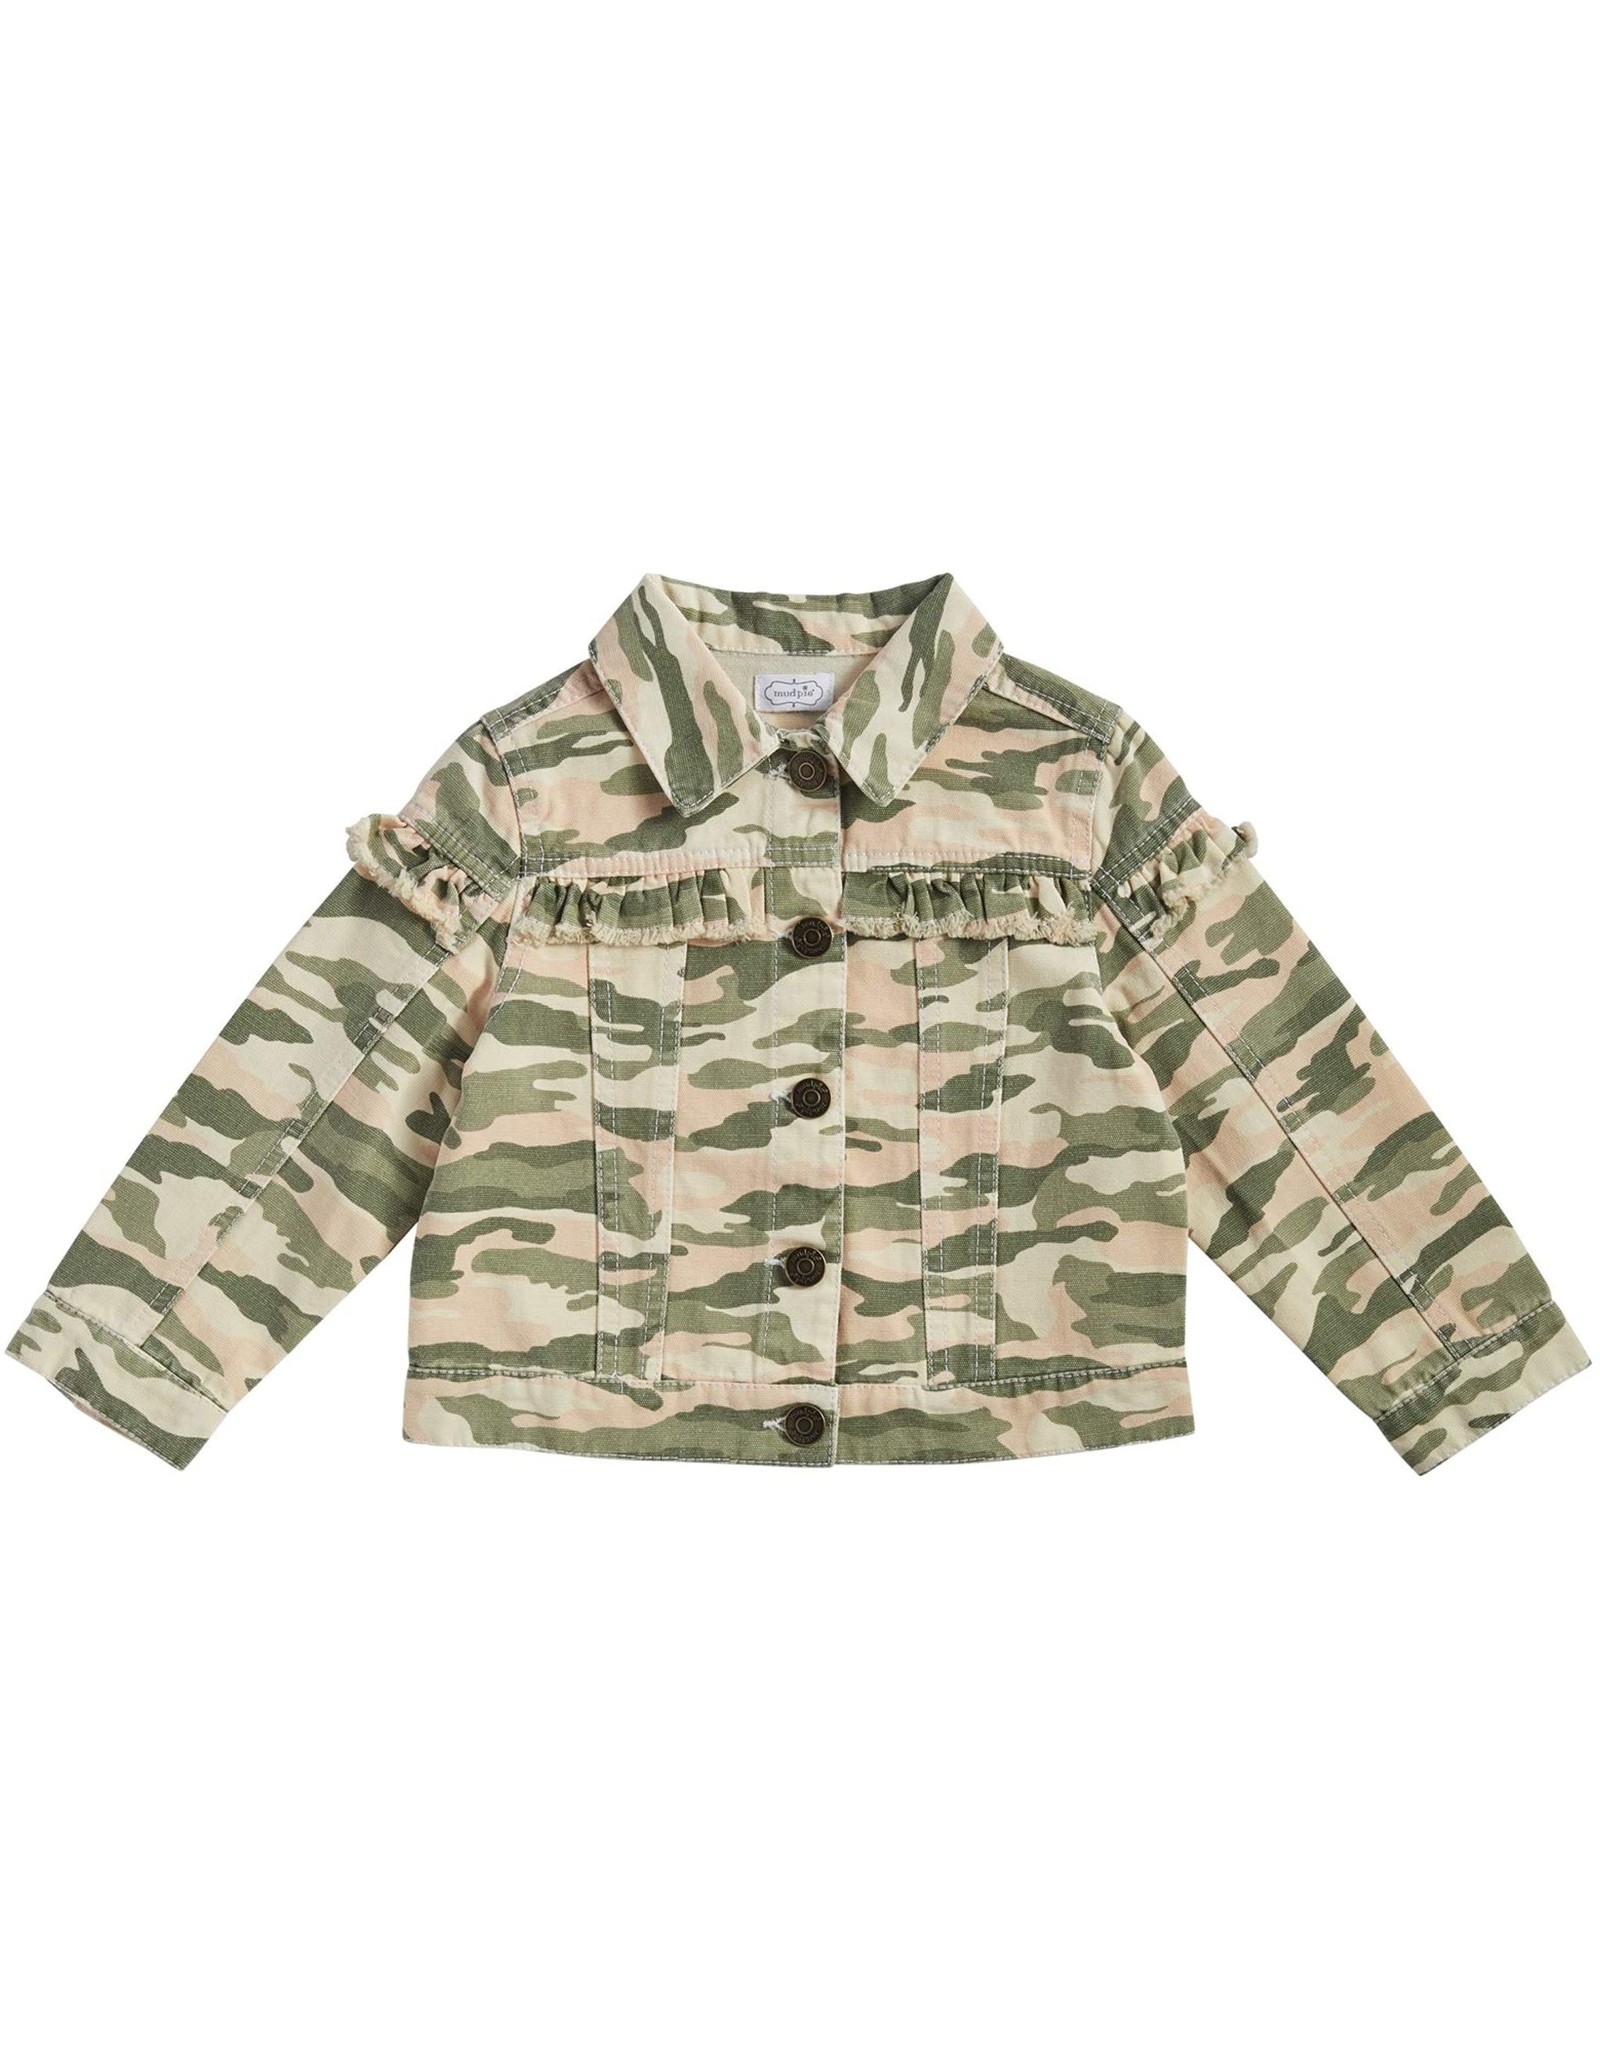 Mud Pie Kids Clothing Camouflage Canvas Ruffle Jacket 12-18 Months